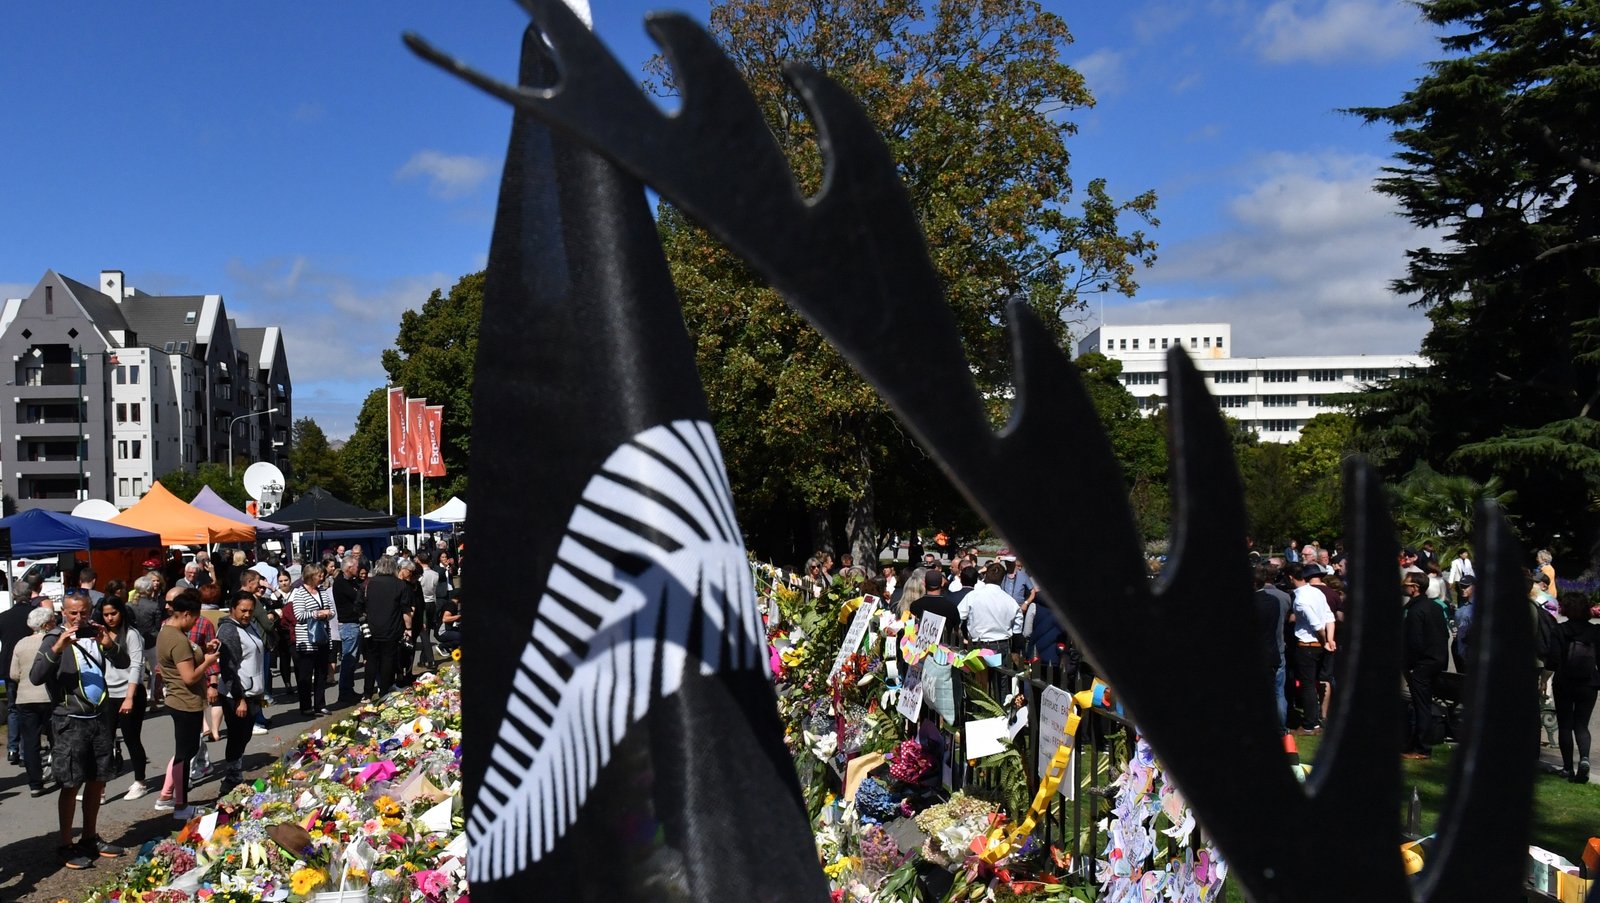 Christchurch attacker charged with terrorism